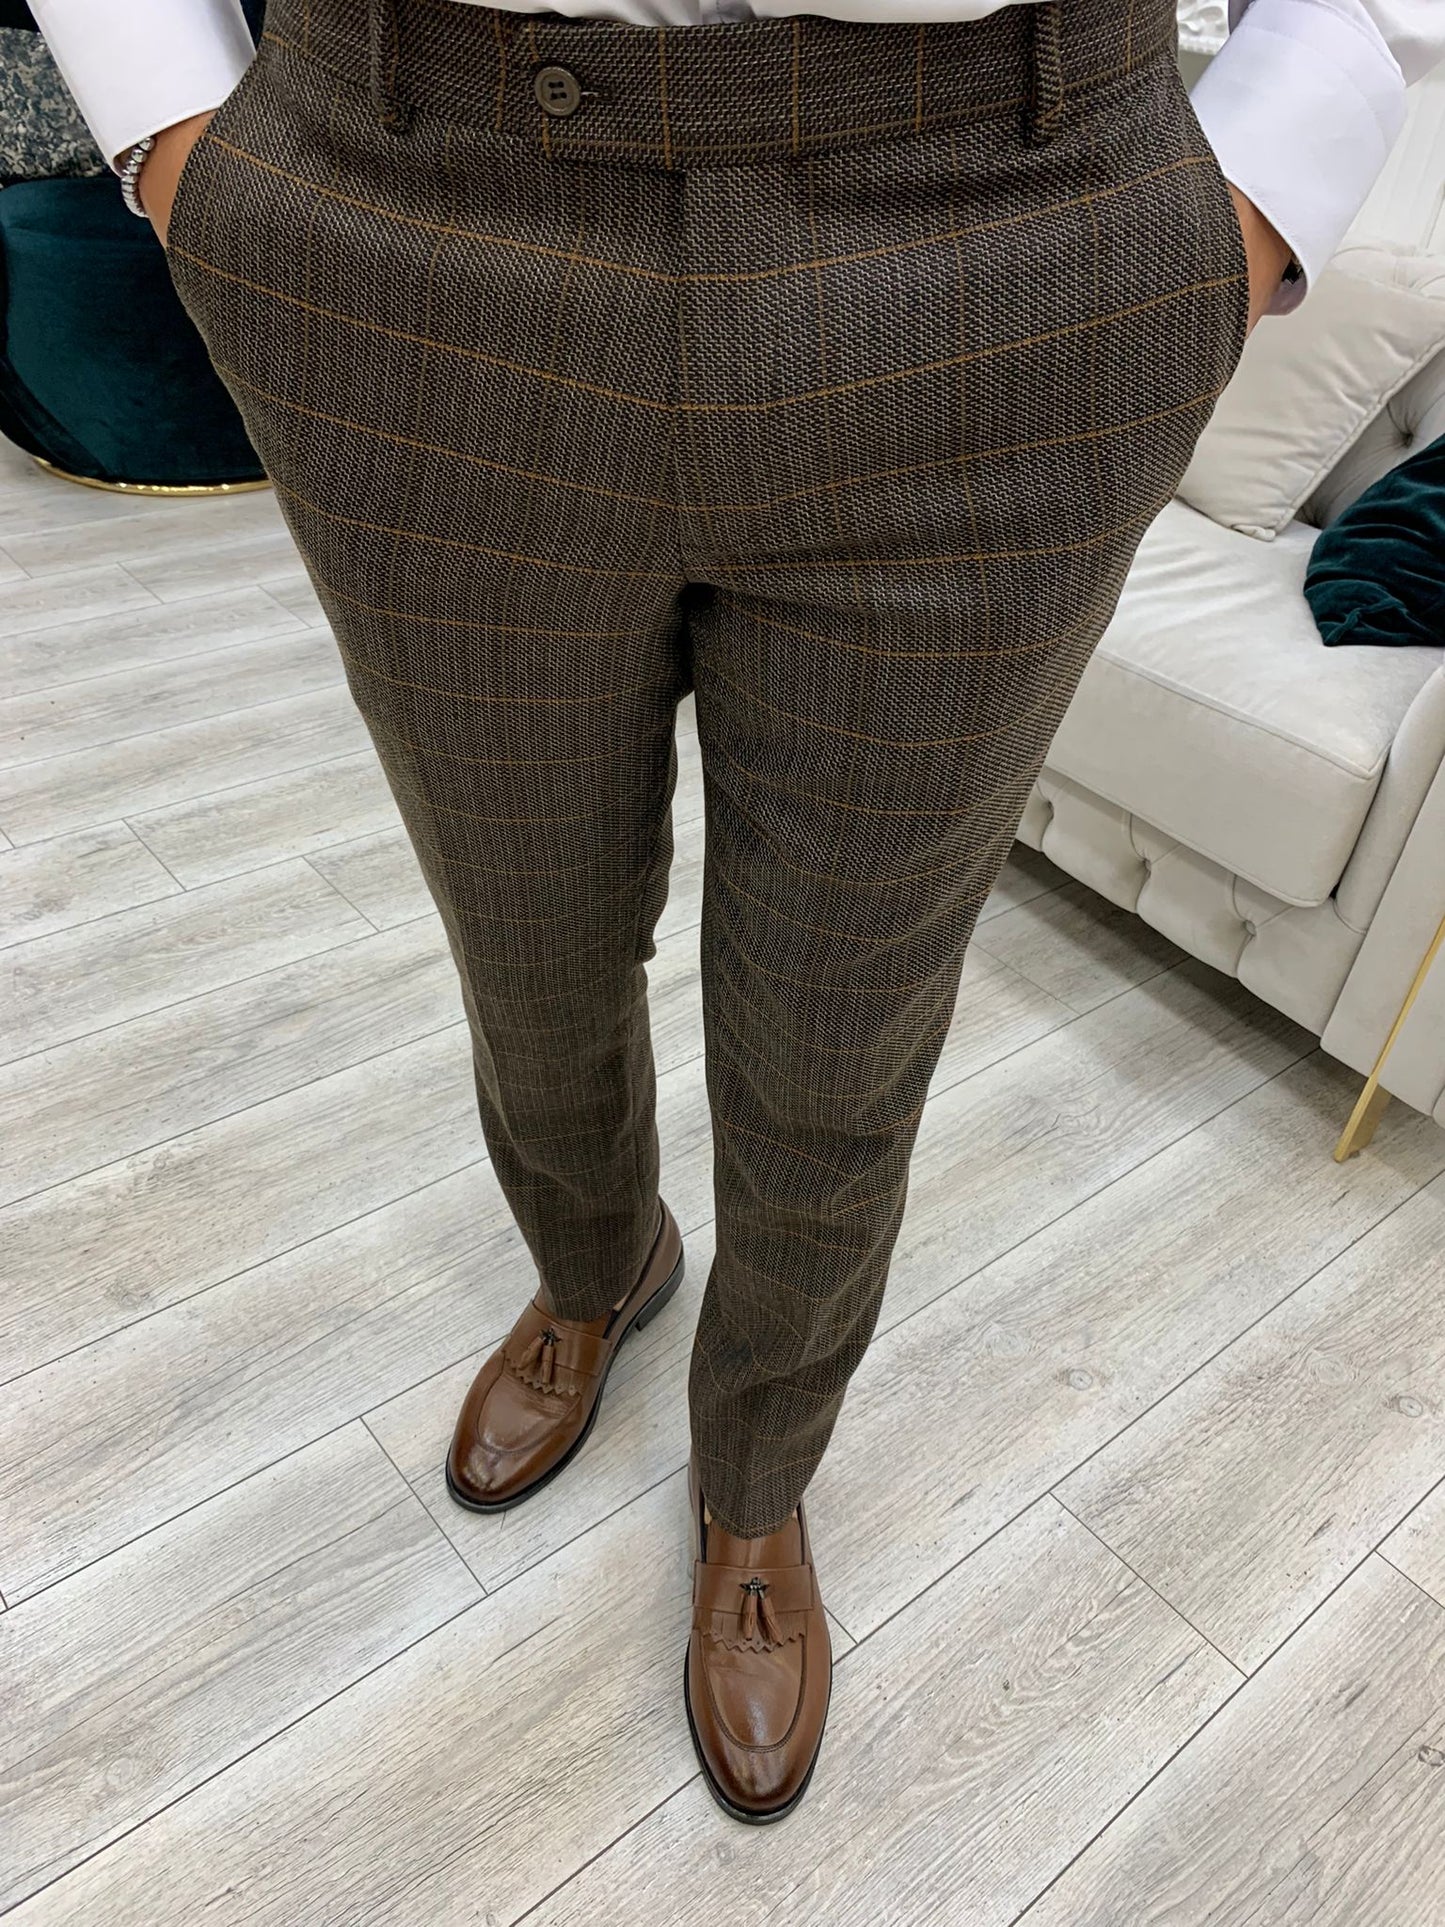 Rosario Brown Slim Fit Double Breasted Plaid Suit